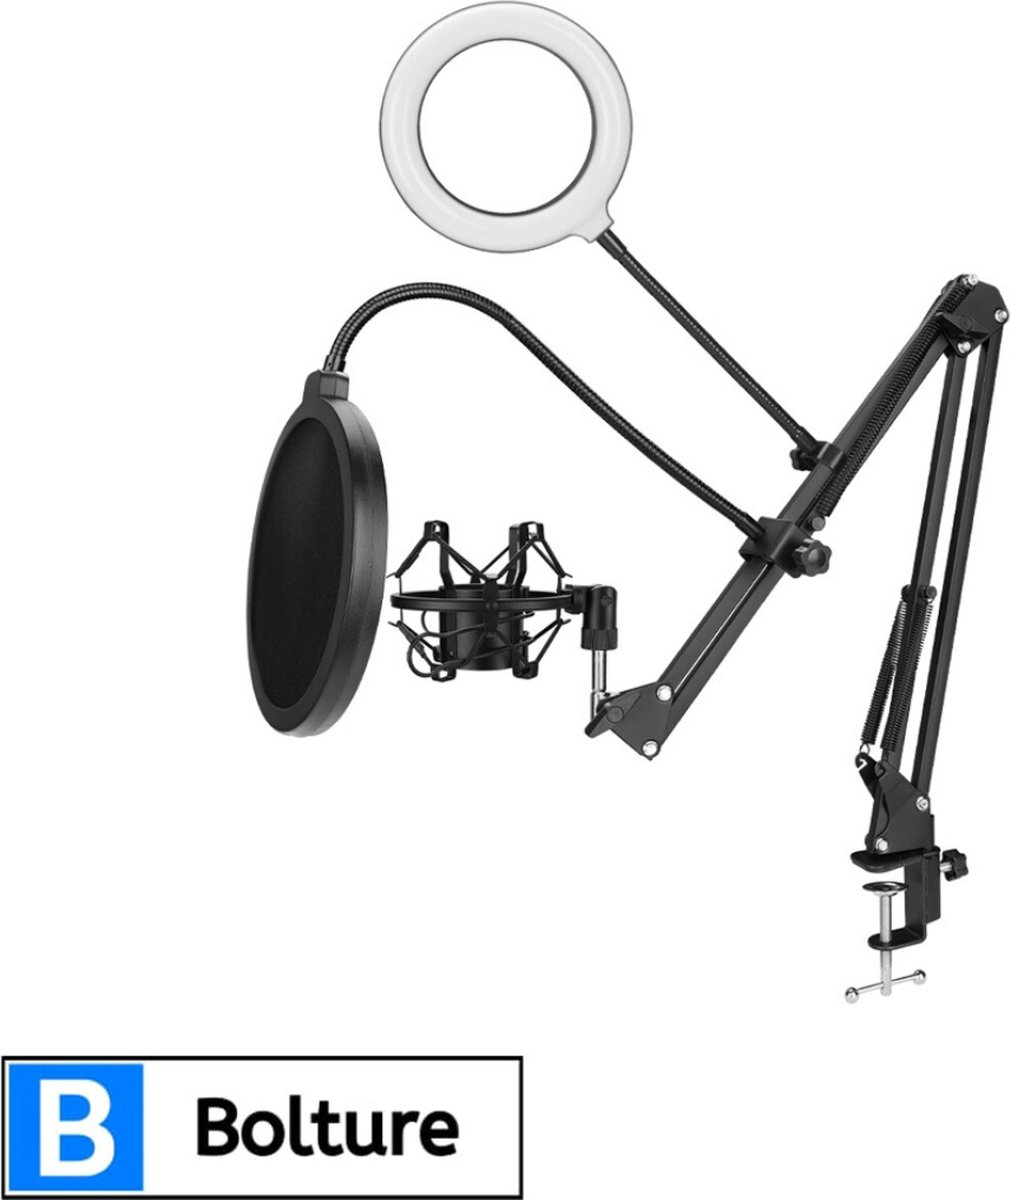 Bolture Microfoon Arm Zonder Microfoon - Mic Standaard Met Popfilter - Mic Houder - Boom Stand - Inclusief LED Ringlamp - Podcast Starterset